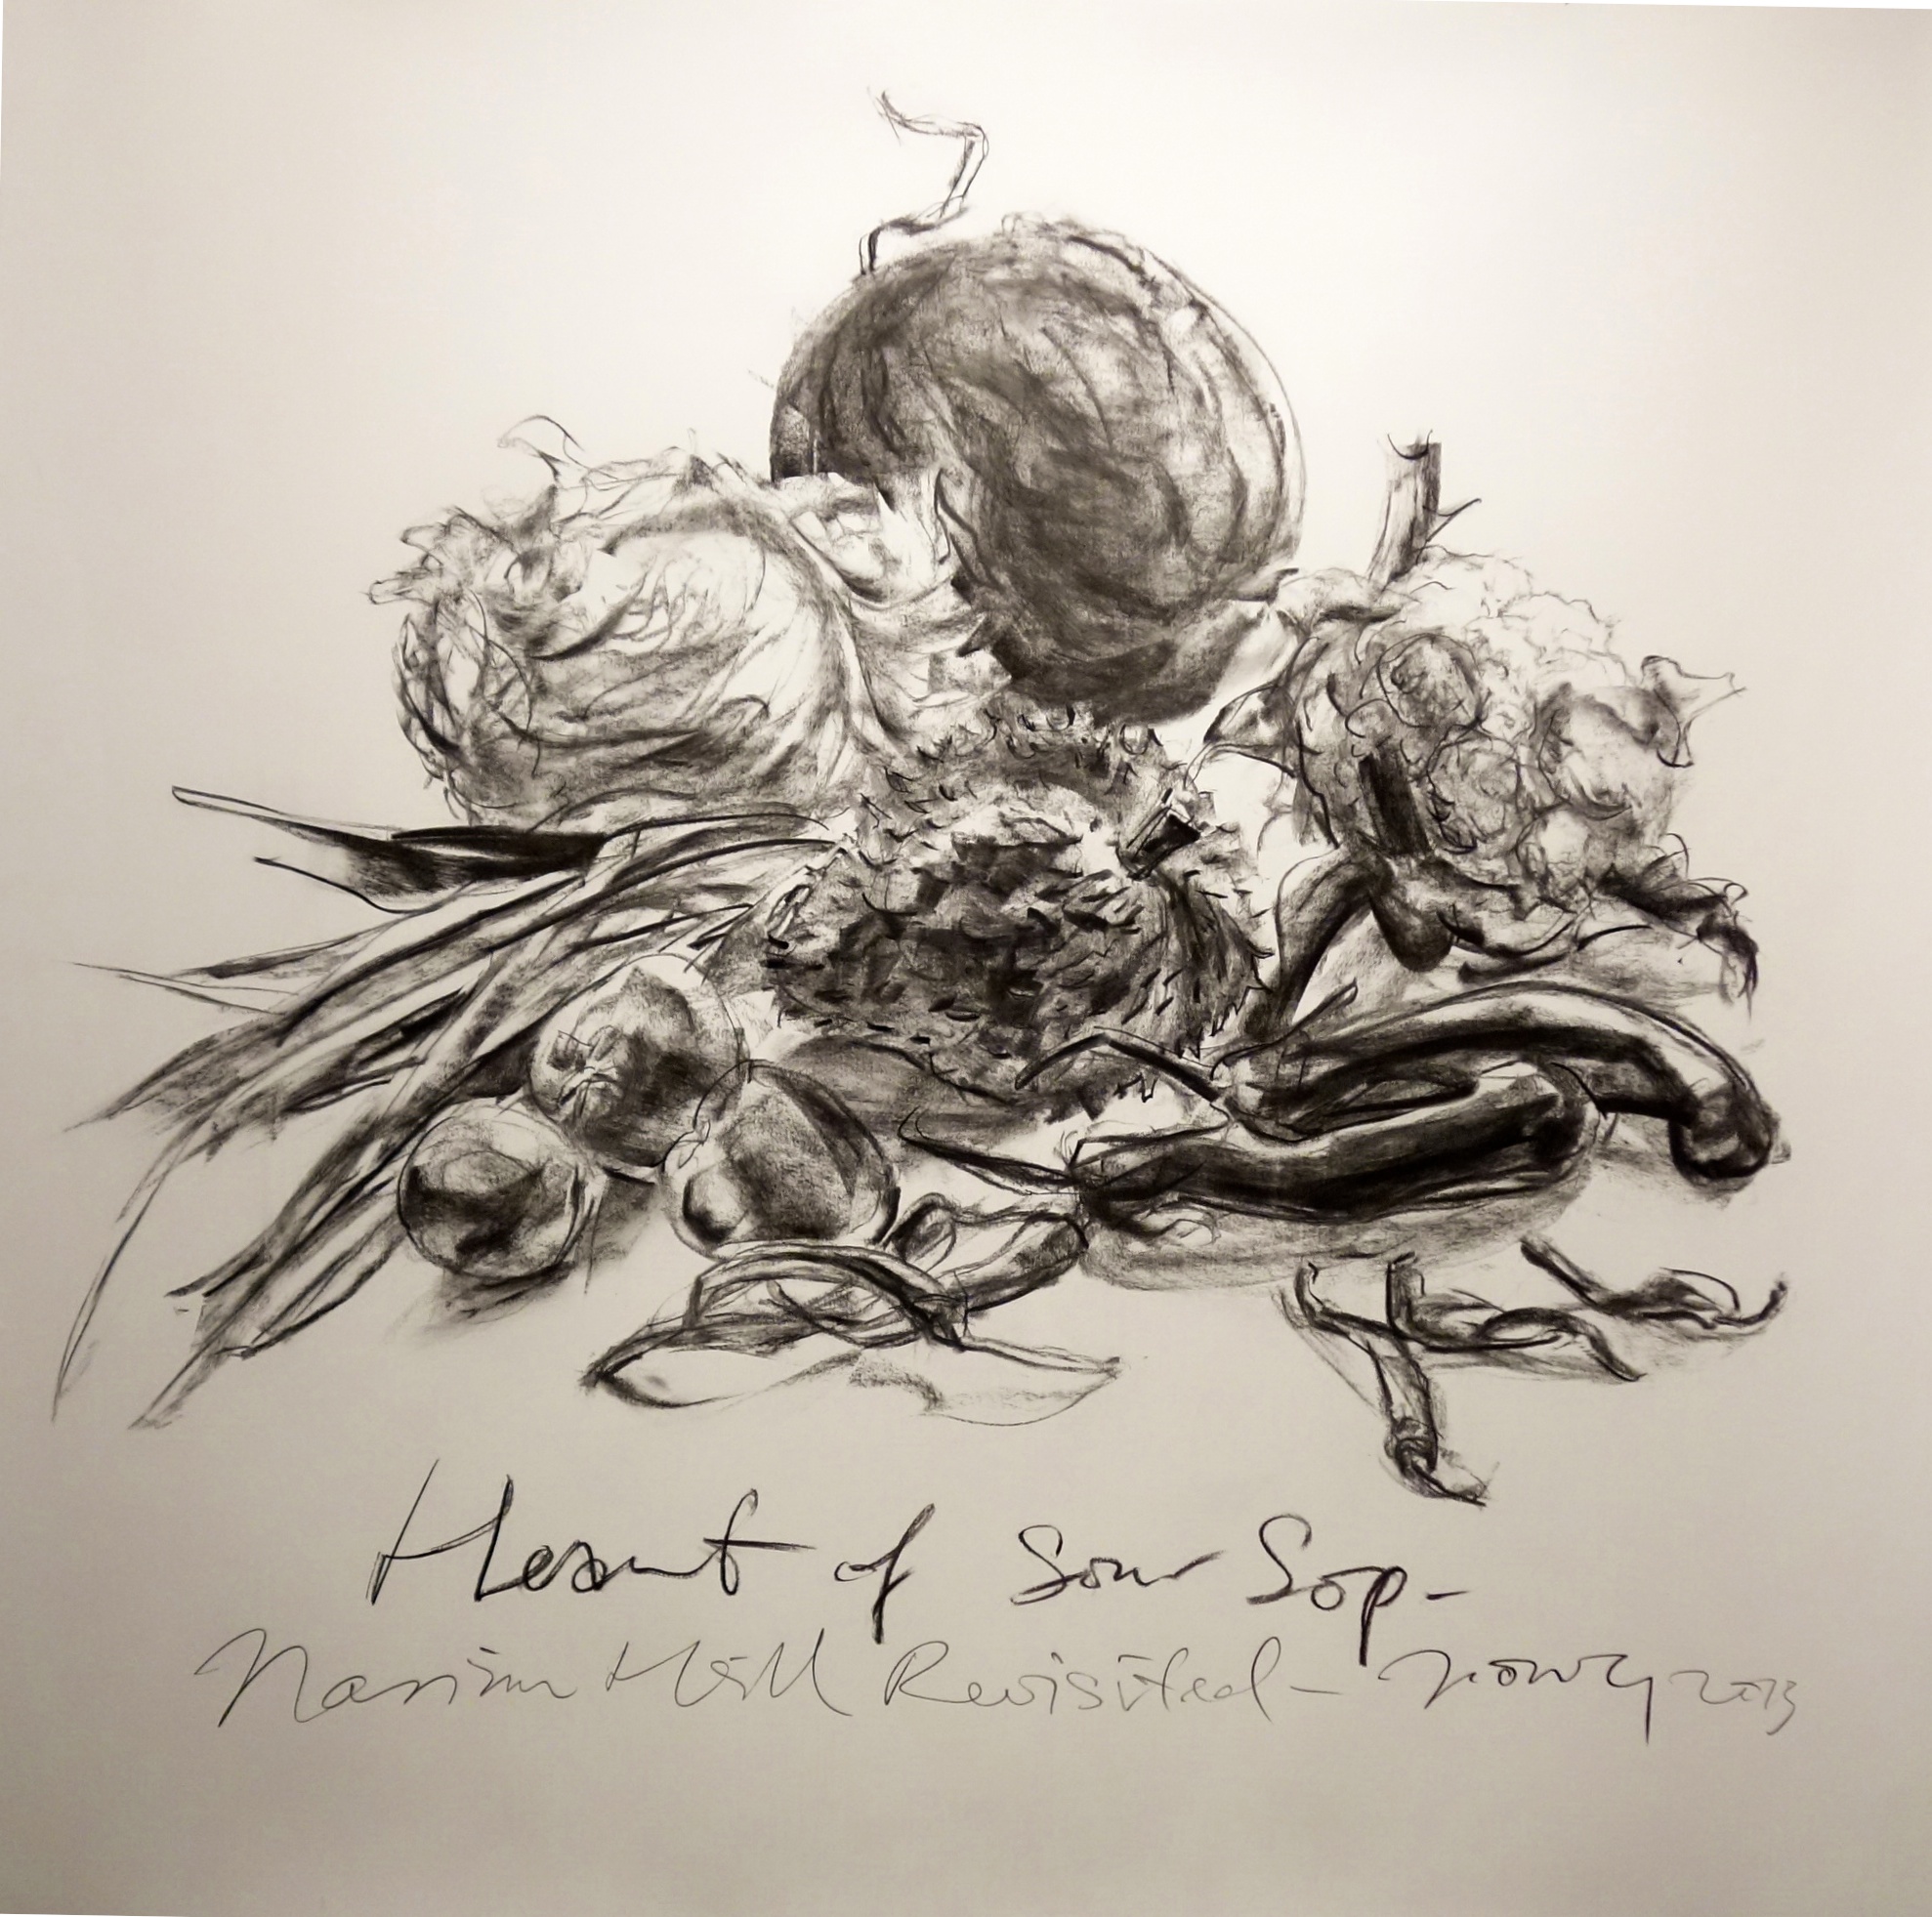   Heart of Soursop  2013 Charcoal on paper approx. H120 x W120 cm 